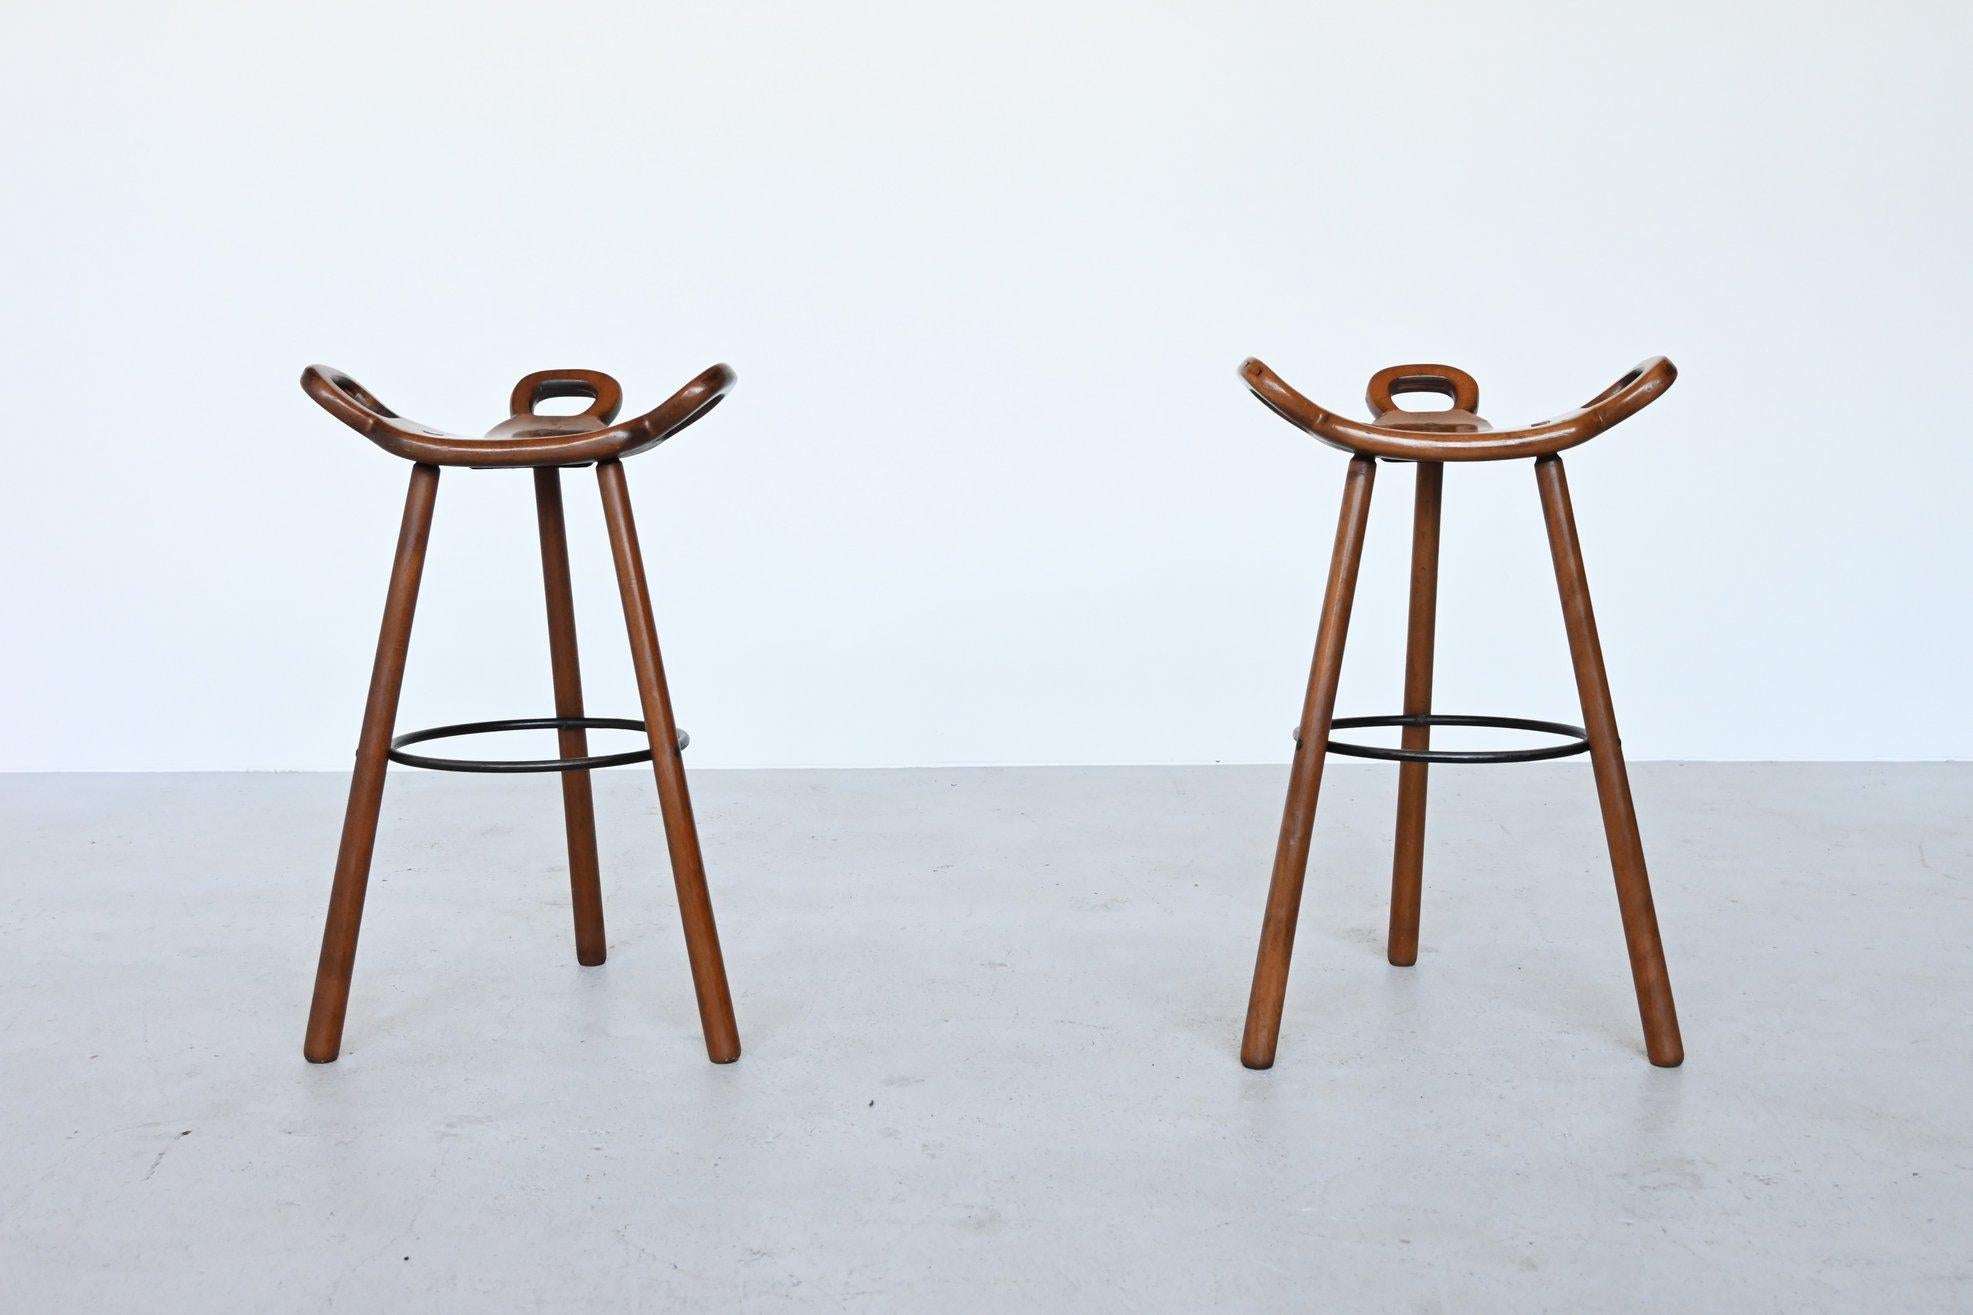 Stained Confonorm Pair of Marbella Brutalist Bar Stools, Spain, 1970